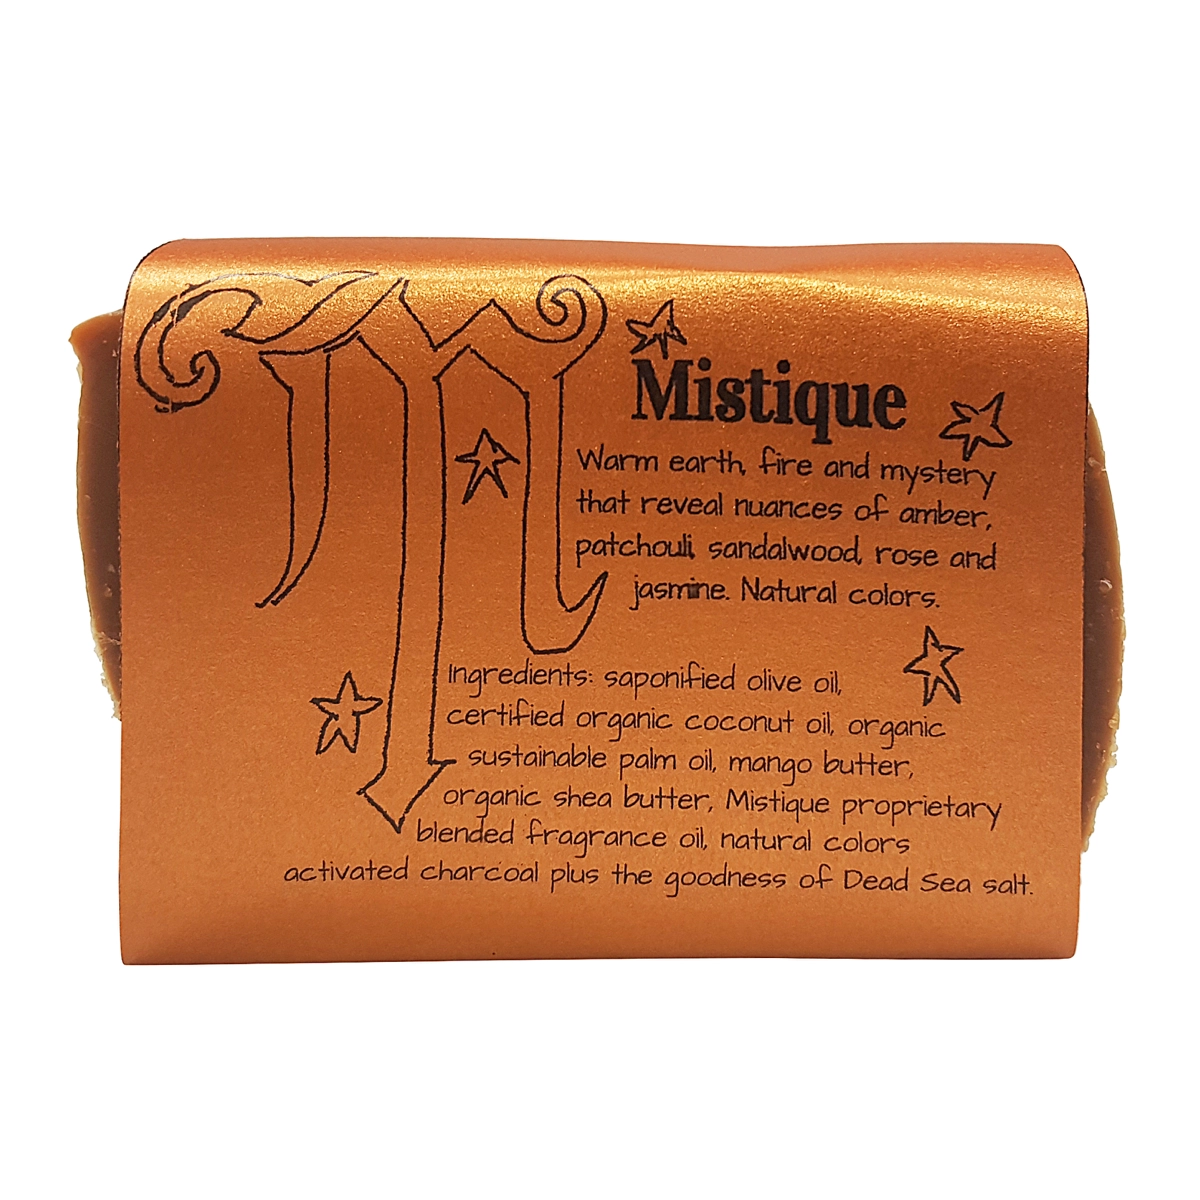 mistique-bath-and-body-soap-sandalwood-patchouli-jasmine-and-spices